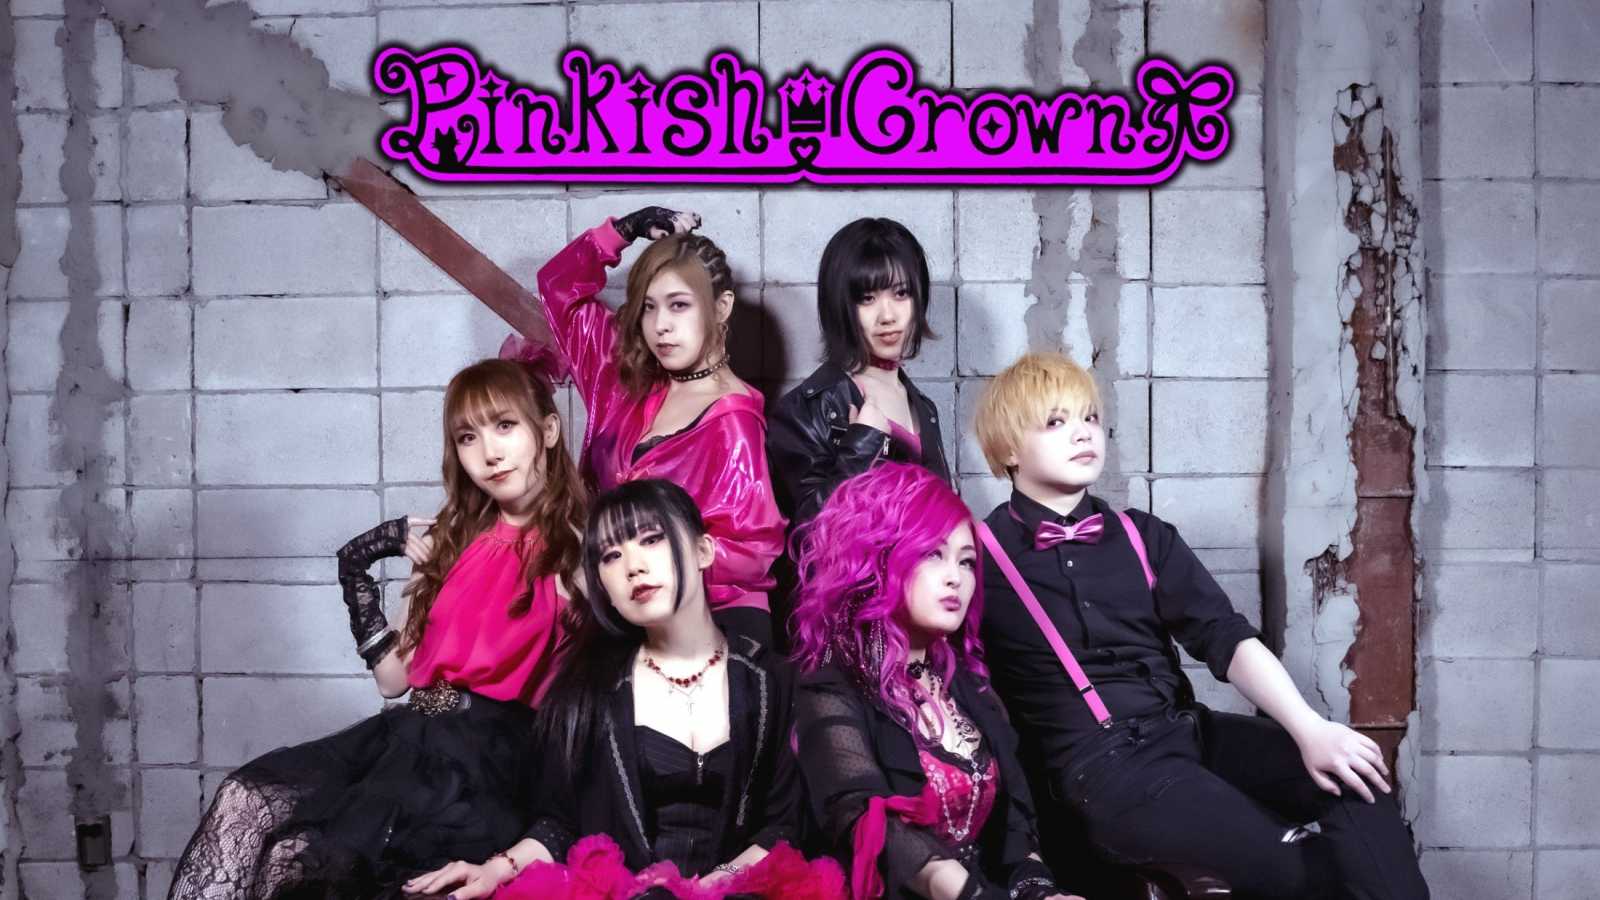 Pinkish Crown © Pinkish Crown. All Rights Reserved.